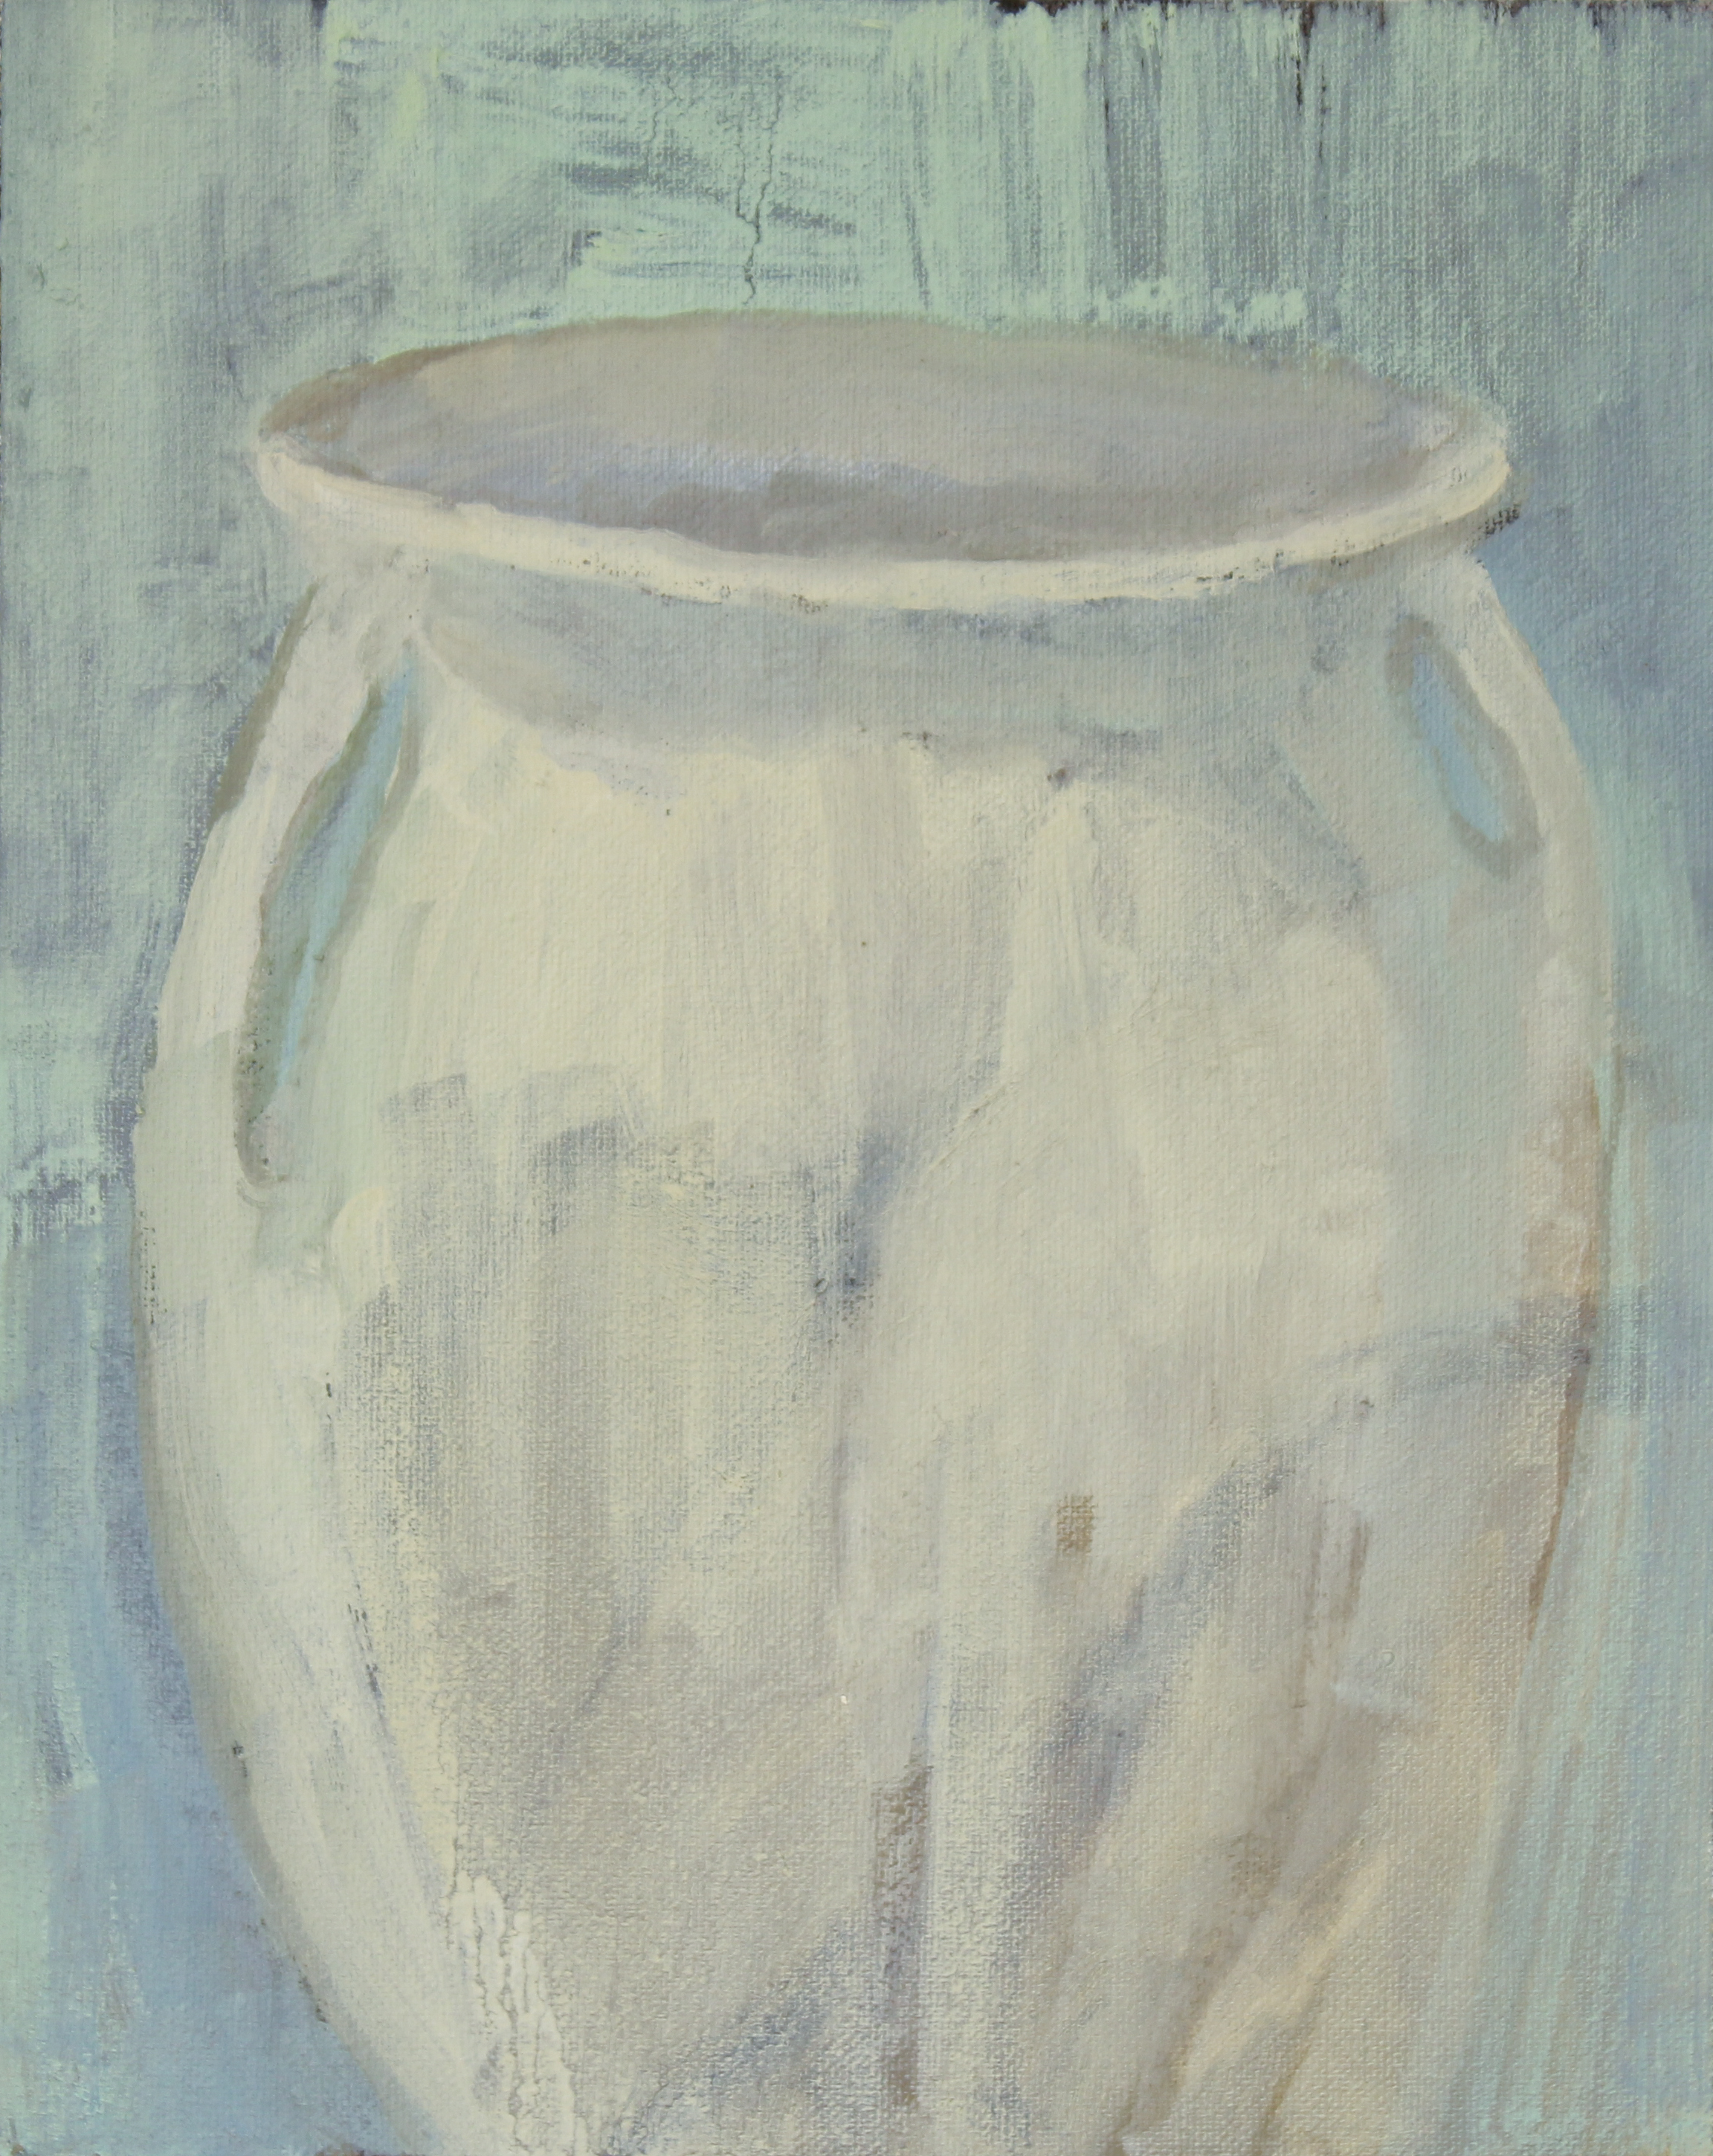    great-grandmother’s vase     oil on canvas 11x14” 2018   purchase  